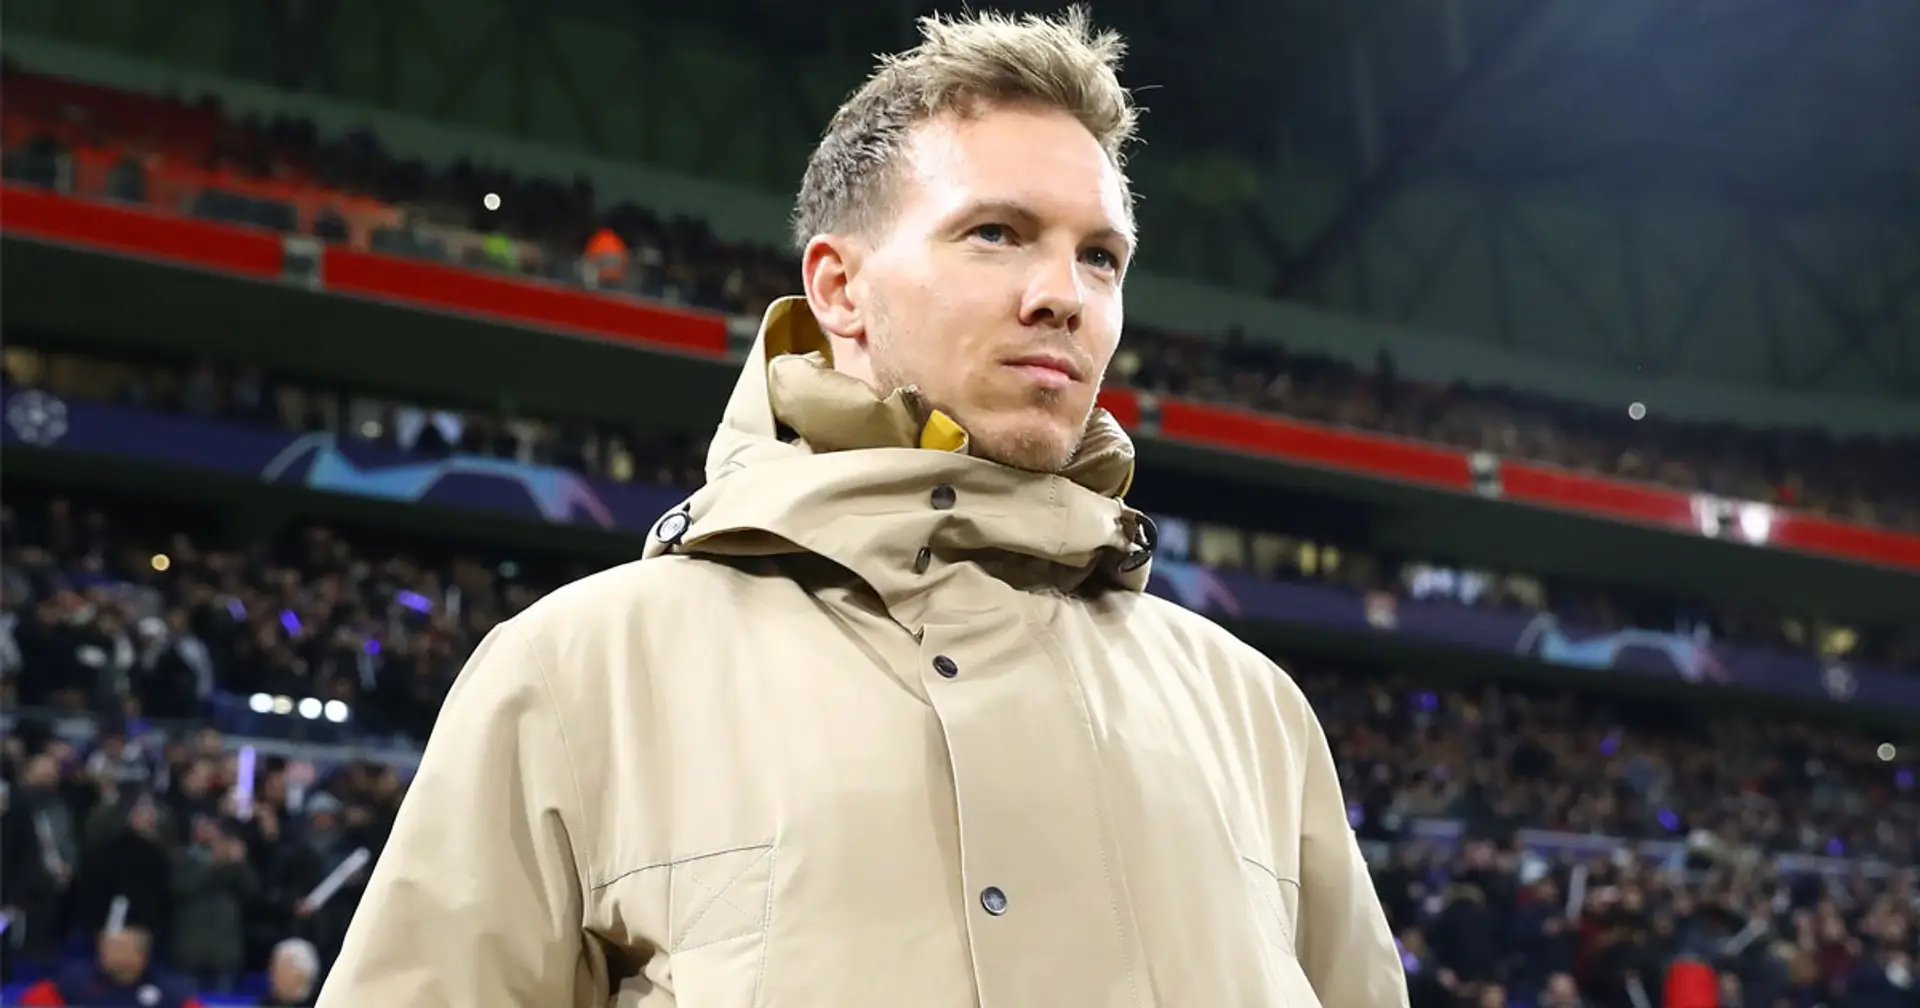 ‘I watched nearly every United game when I was younger’: RB Leipzig boss Julian Nagelsmann excited for Old Trafford clash